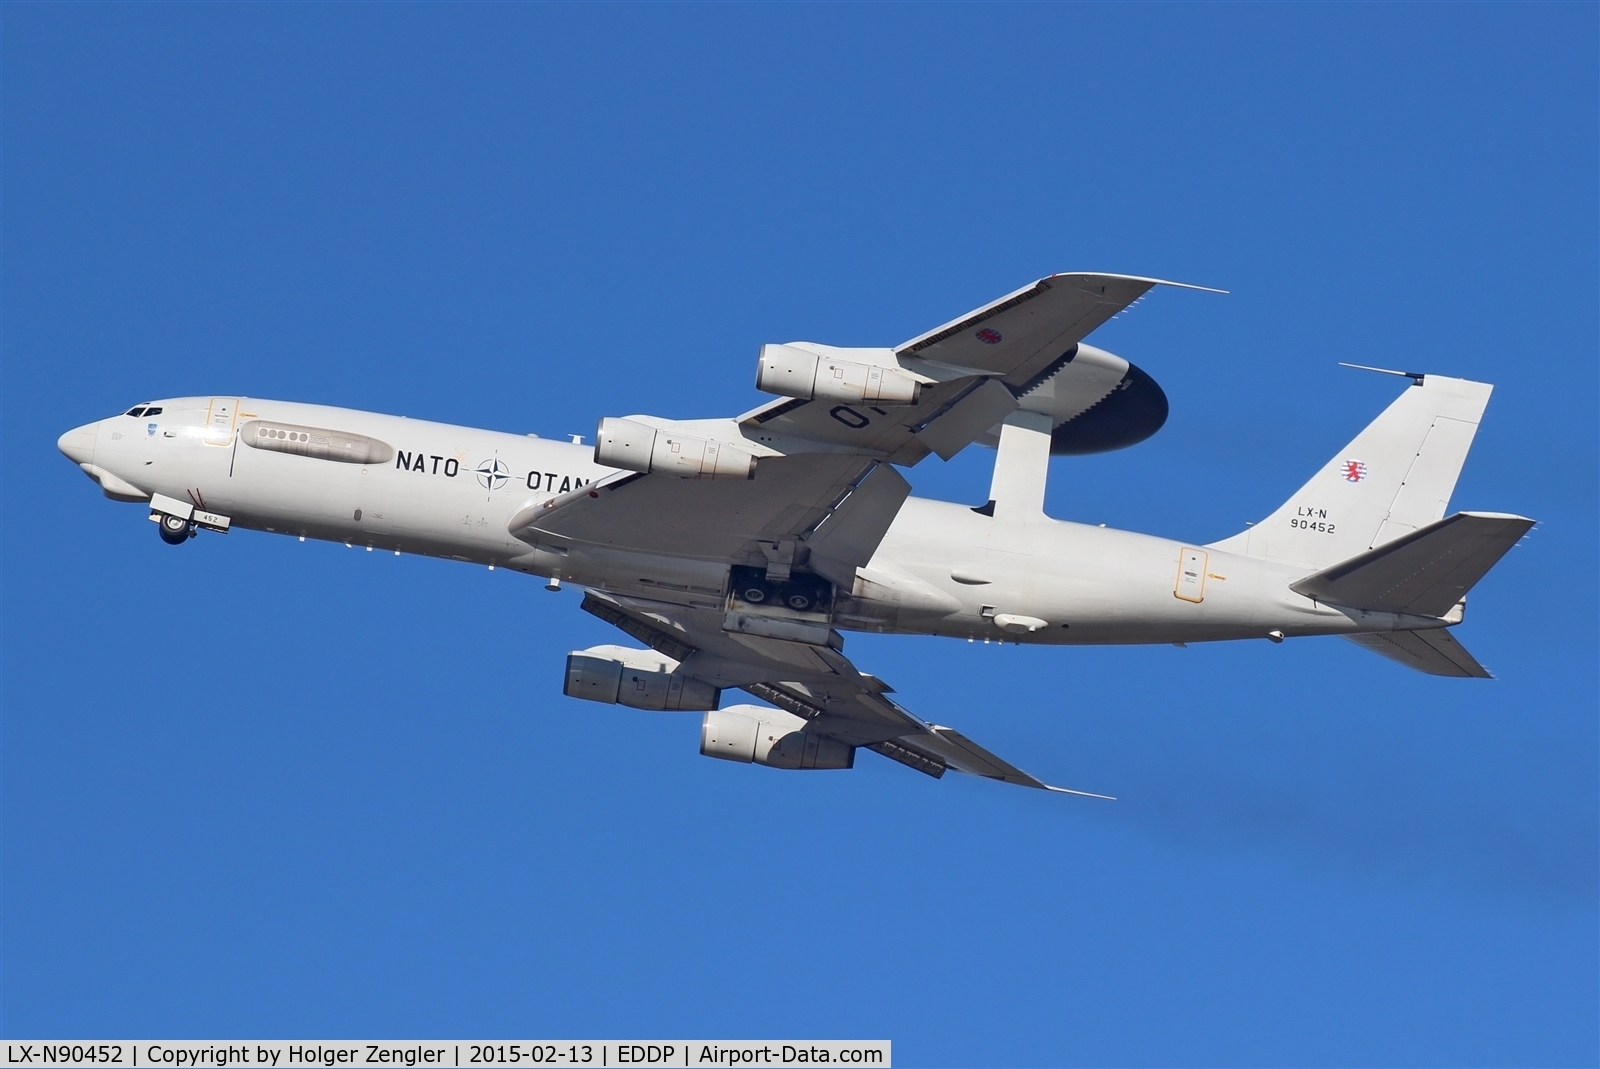 LX-N90452, 1984 Boeing E-3A Sentry C/N 22847, Leaving LEJ westbound after 4 t&g....